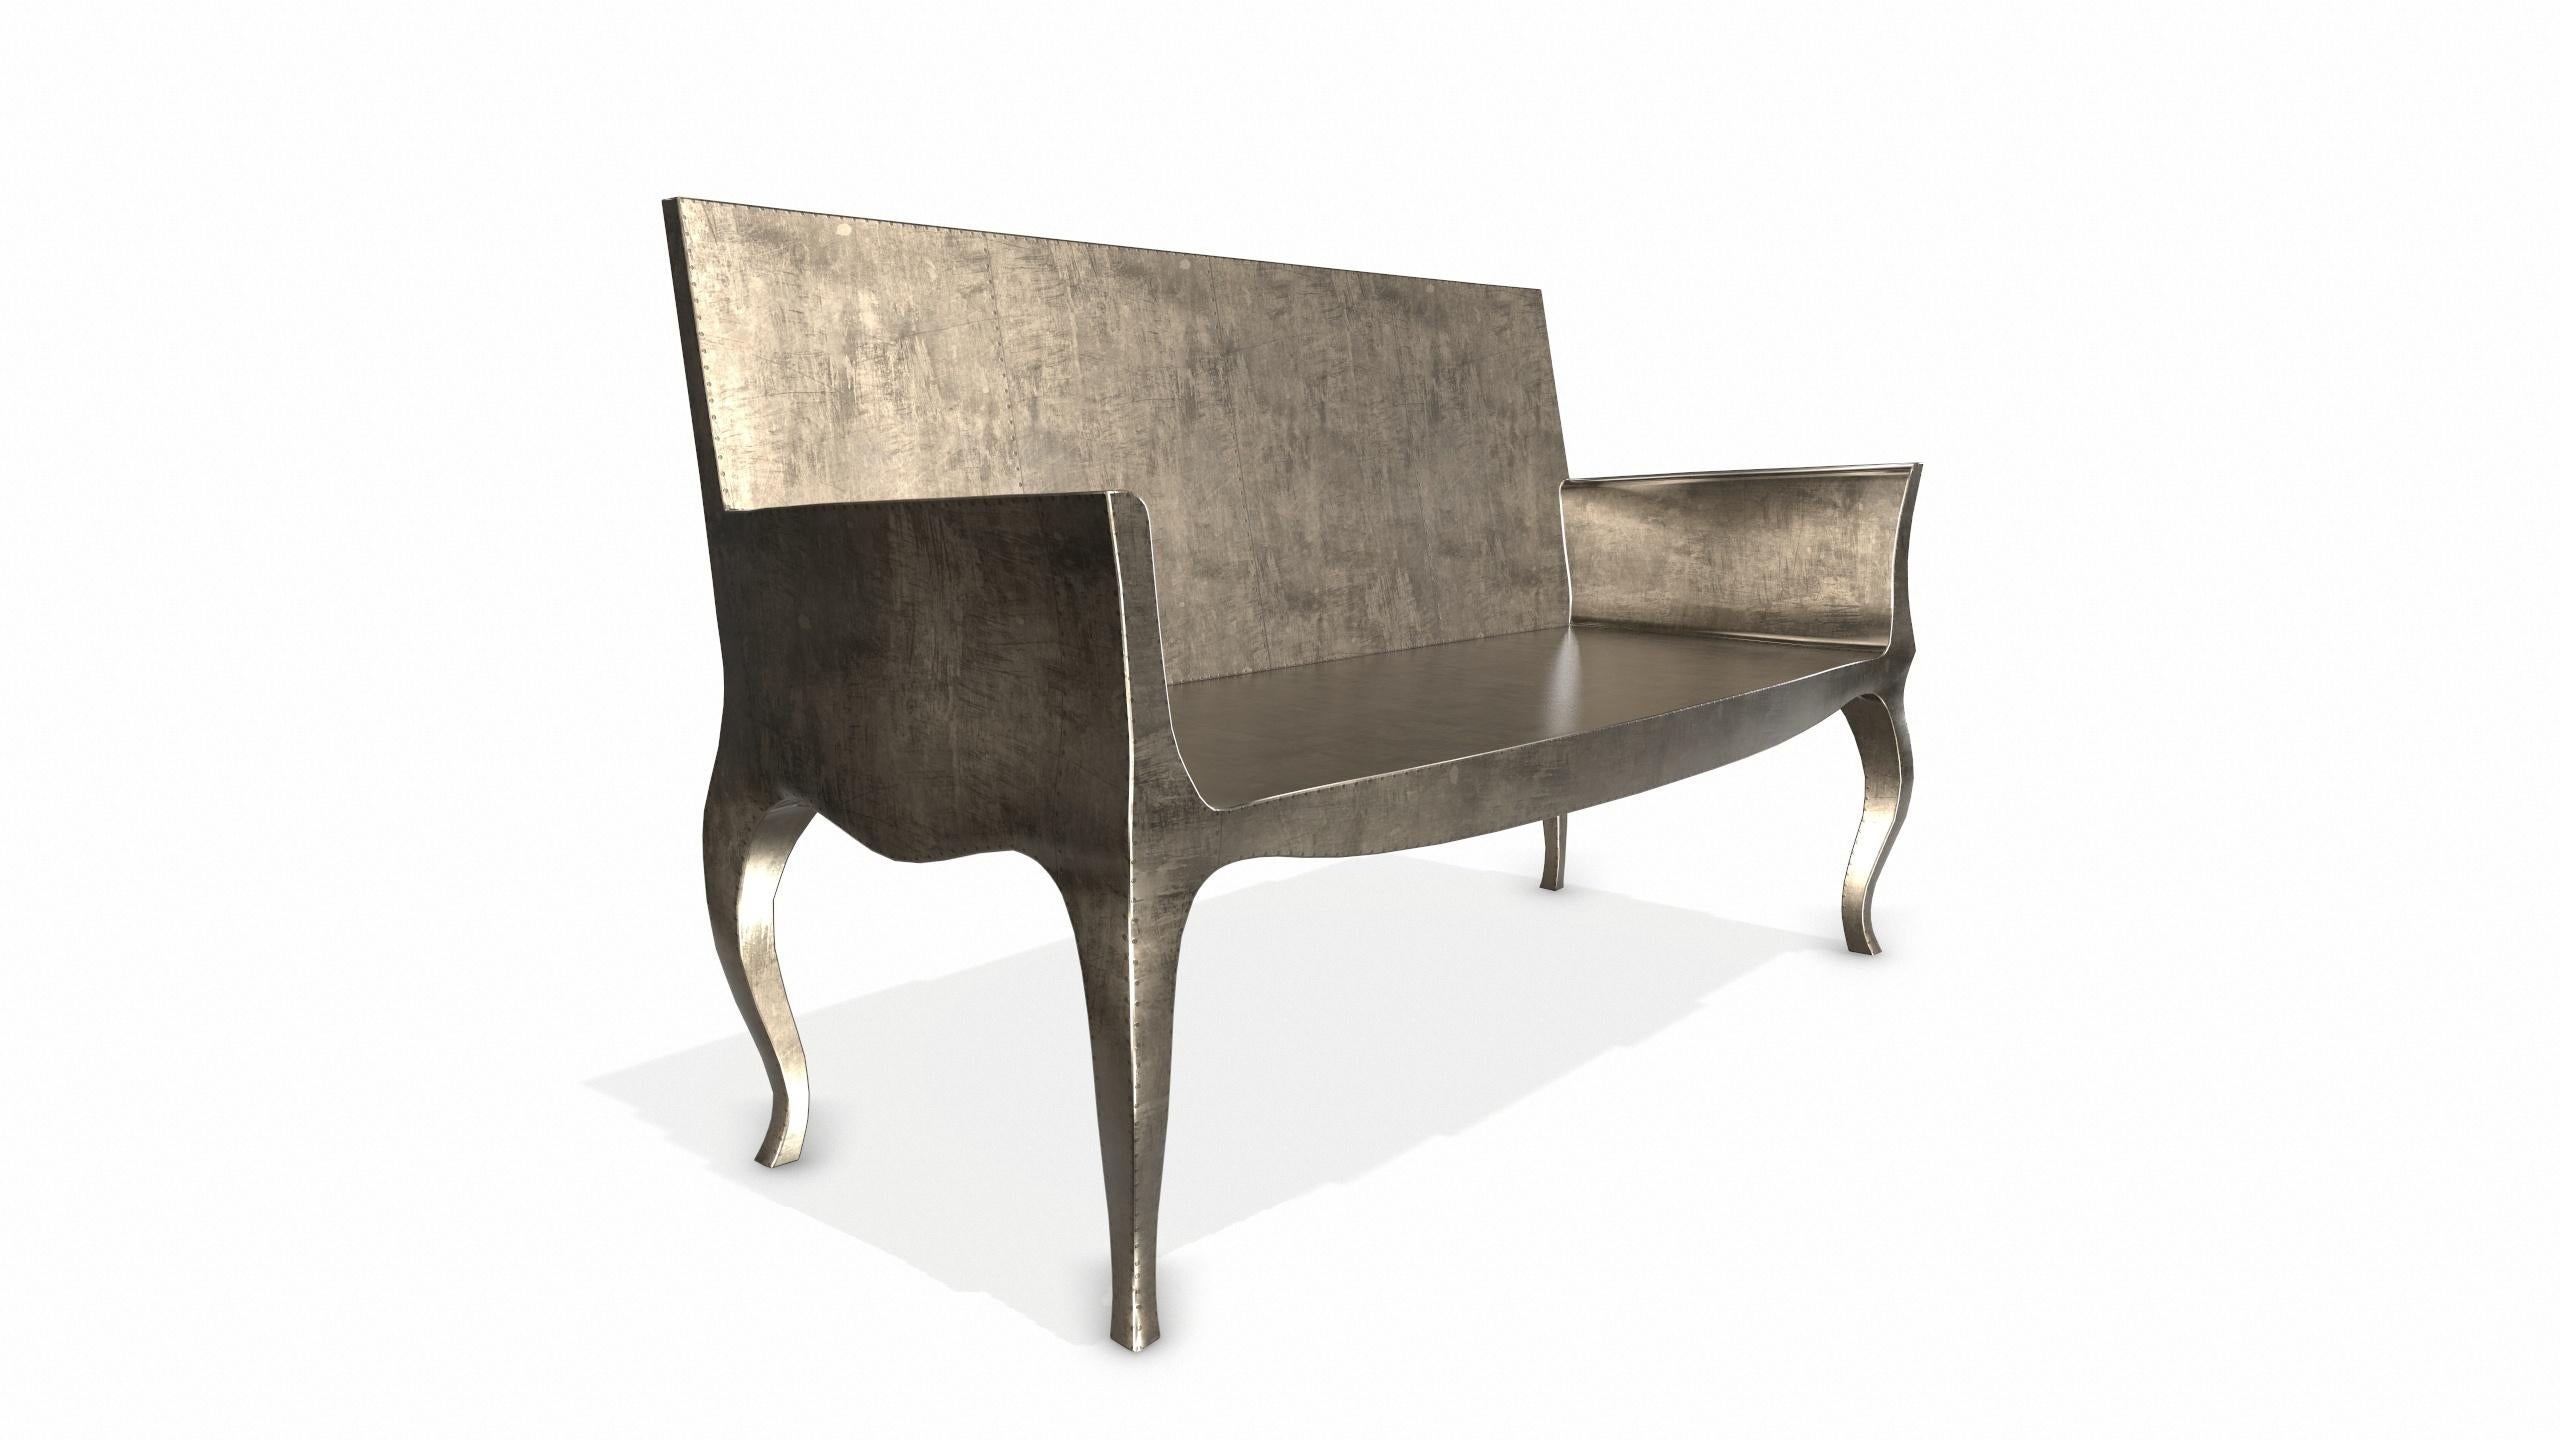 Louise Settee Art Deco Daybeds in Smooth Antique Bronze by Paul Mathieu In New Condition For Sale In New York, NY